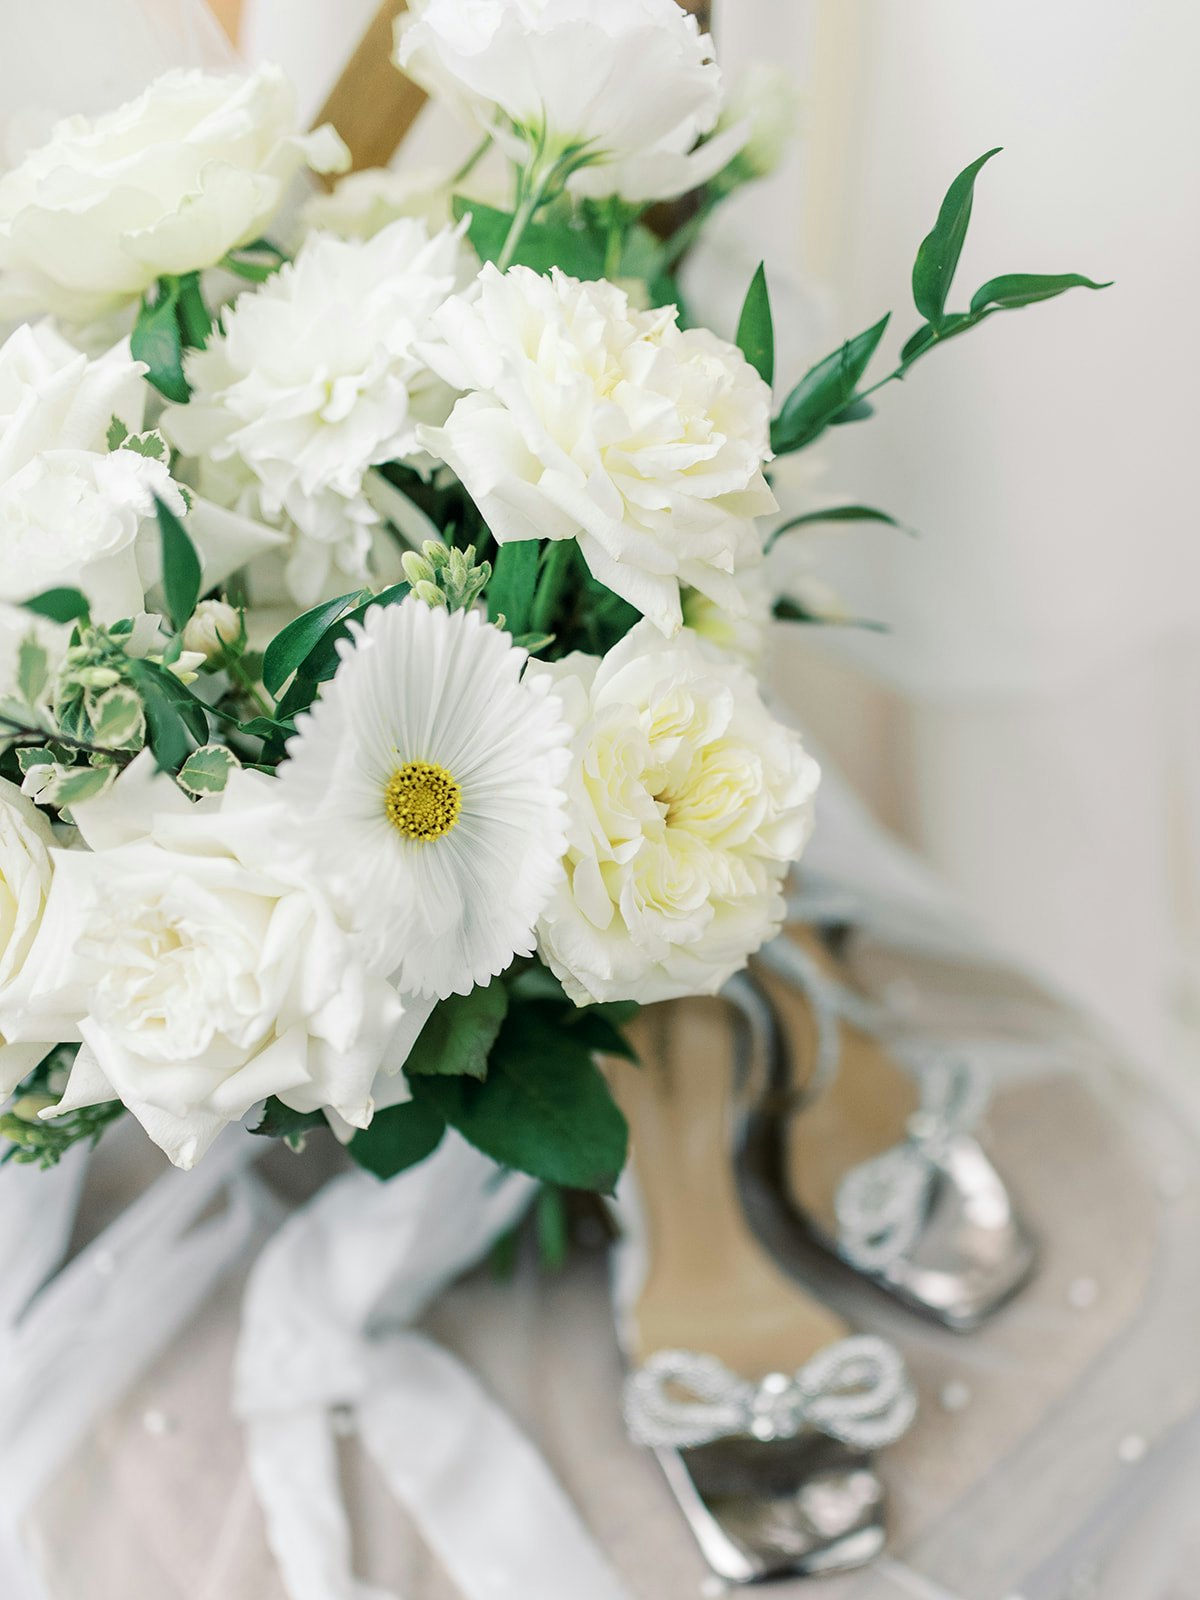 Flowers and wedding shoes